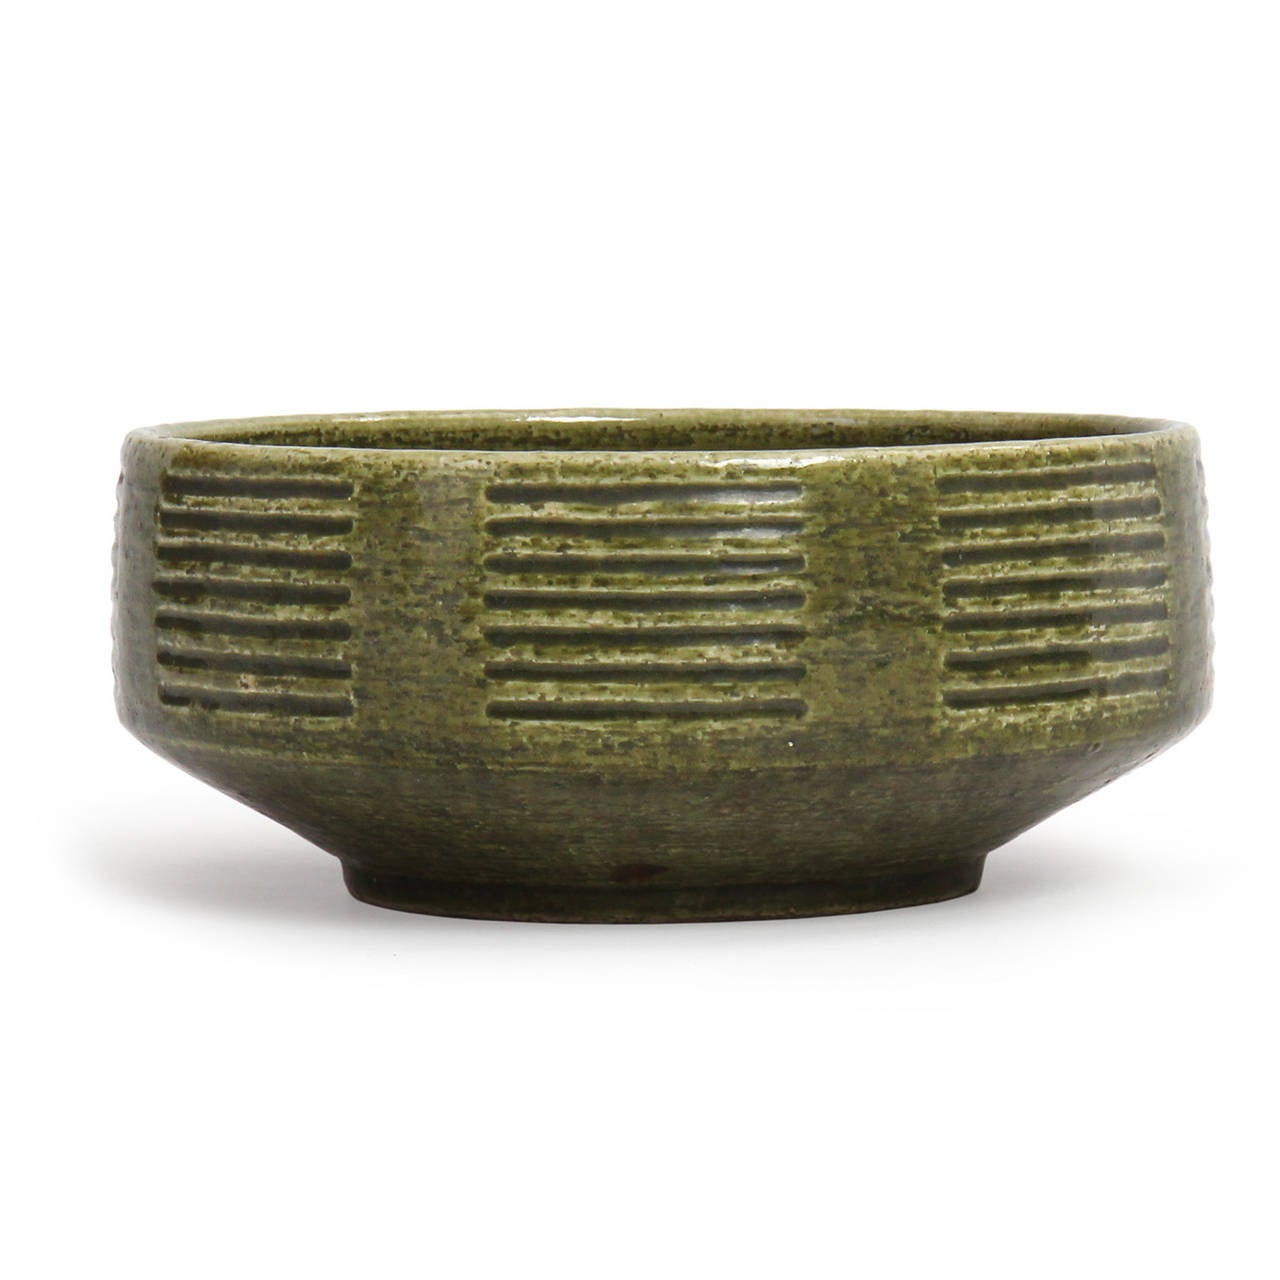 A beautiful and well-scaled footed unique stoneware bowl having horizontal parallel stacks of incised decoration and covered in a lustrous and variegated deep green glaze.